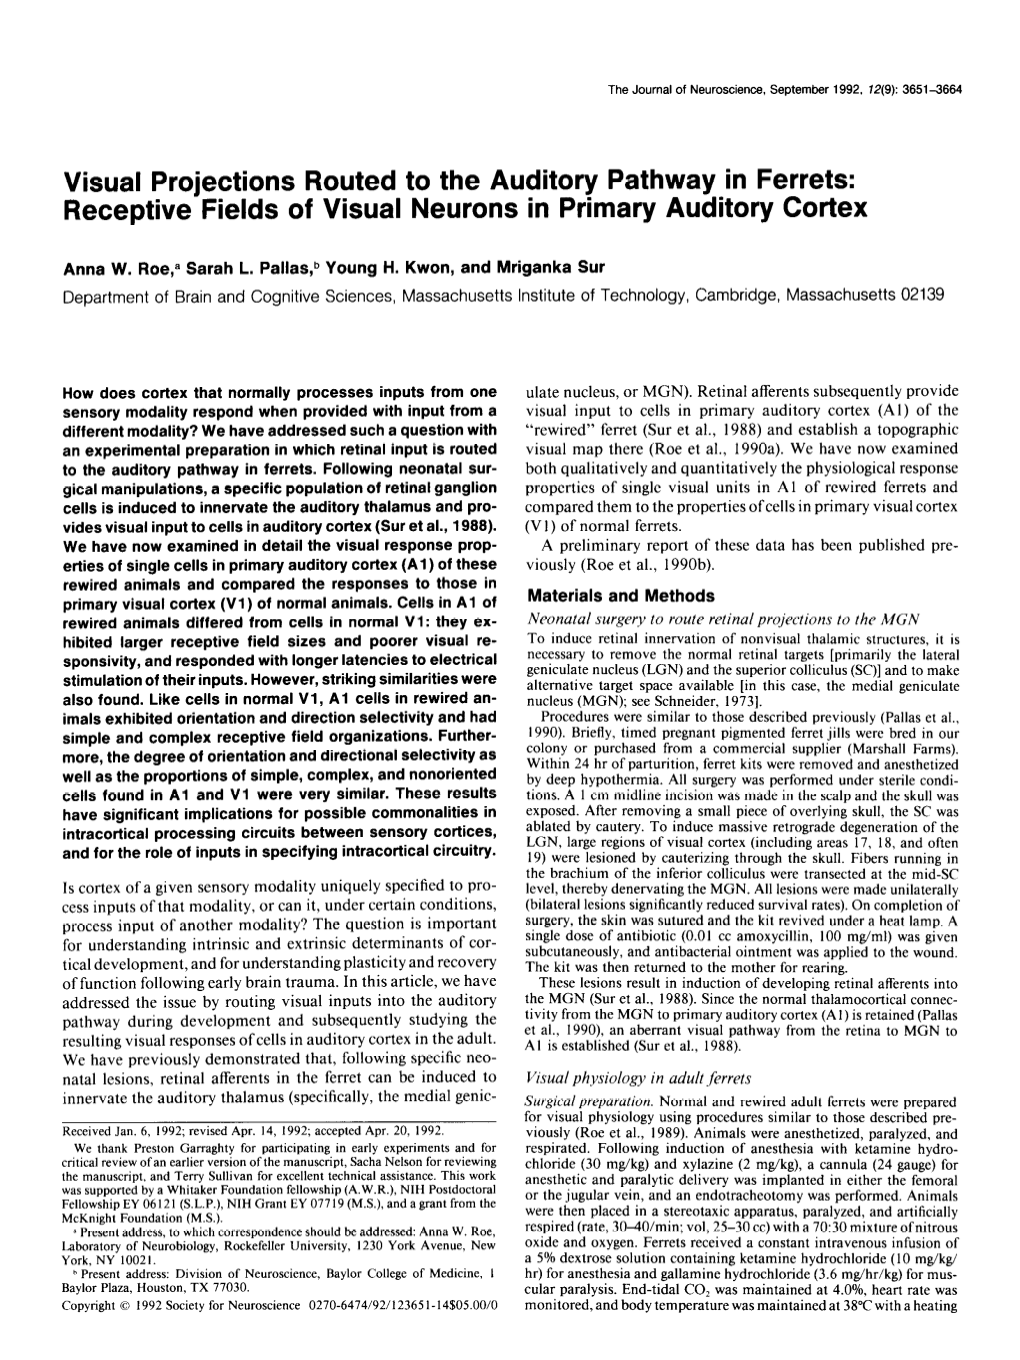 Receptive Fields of Visual Neurons in Primary Auditory Cortex